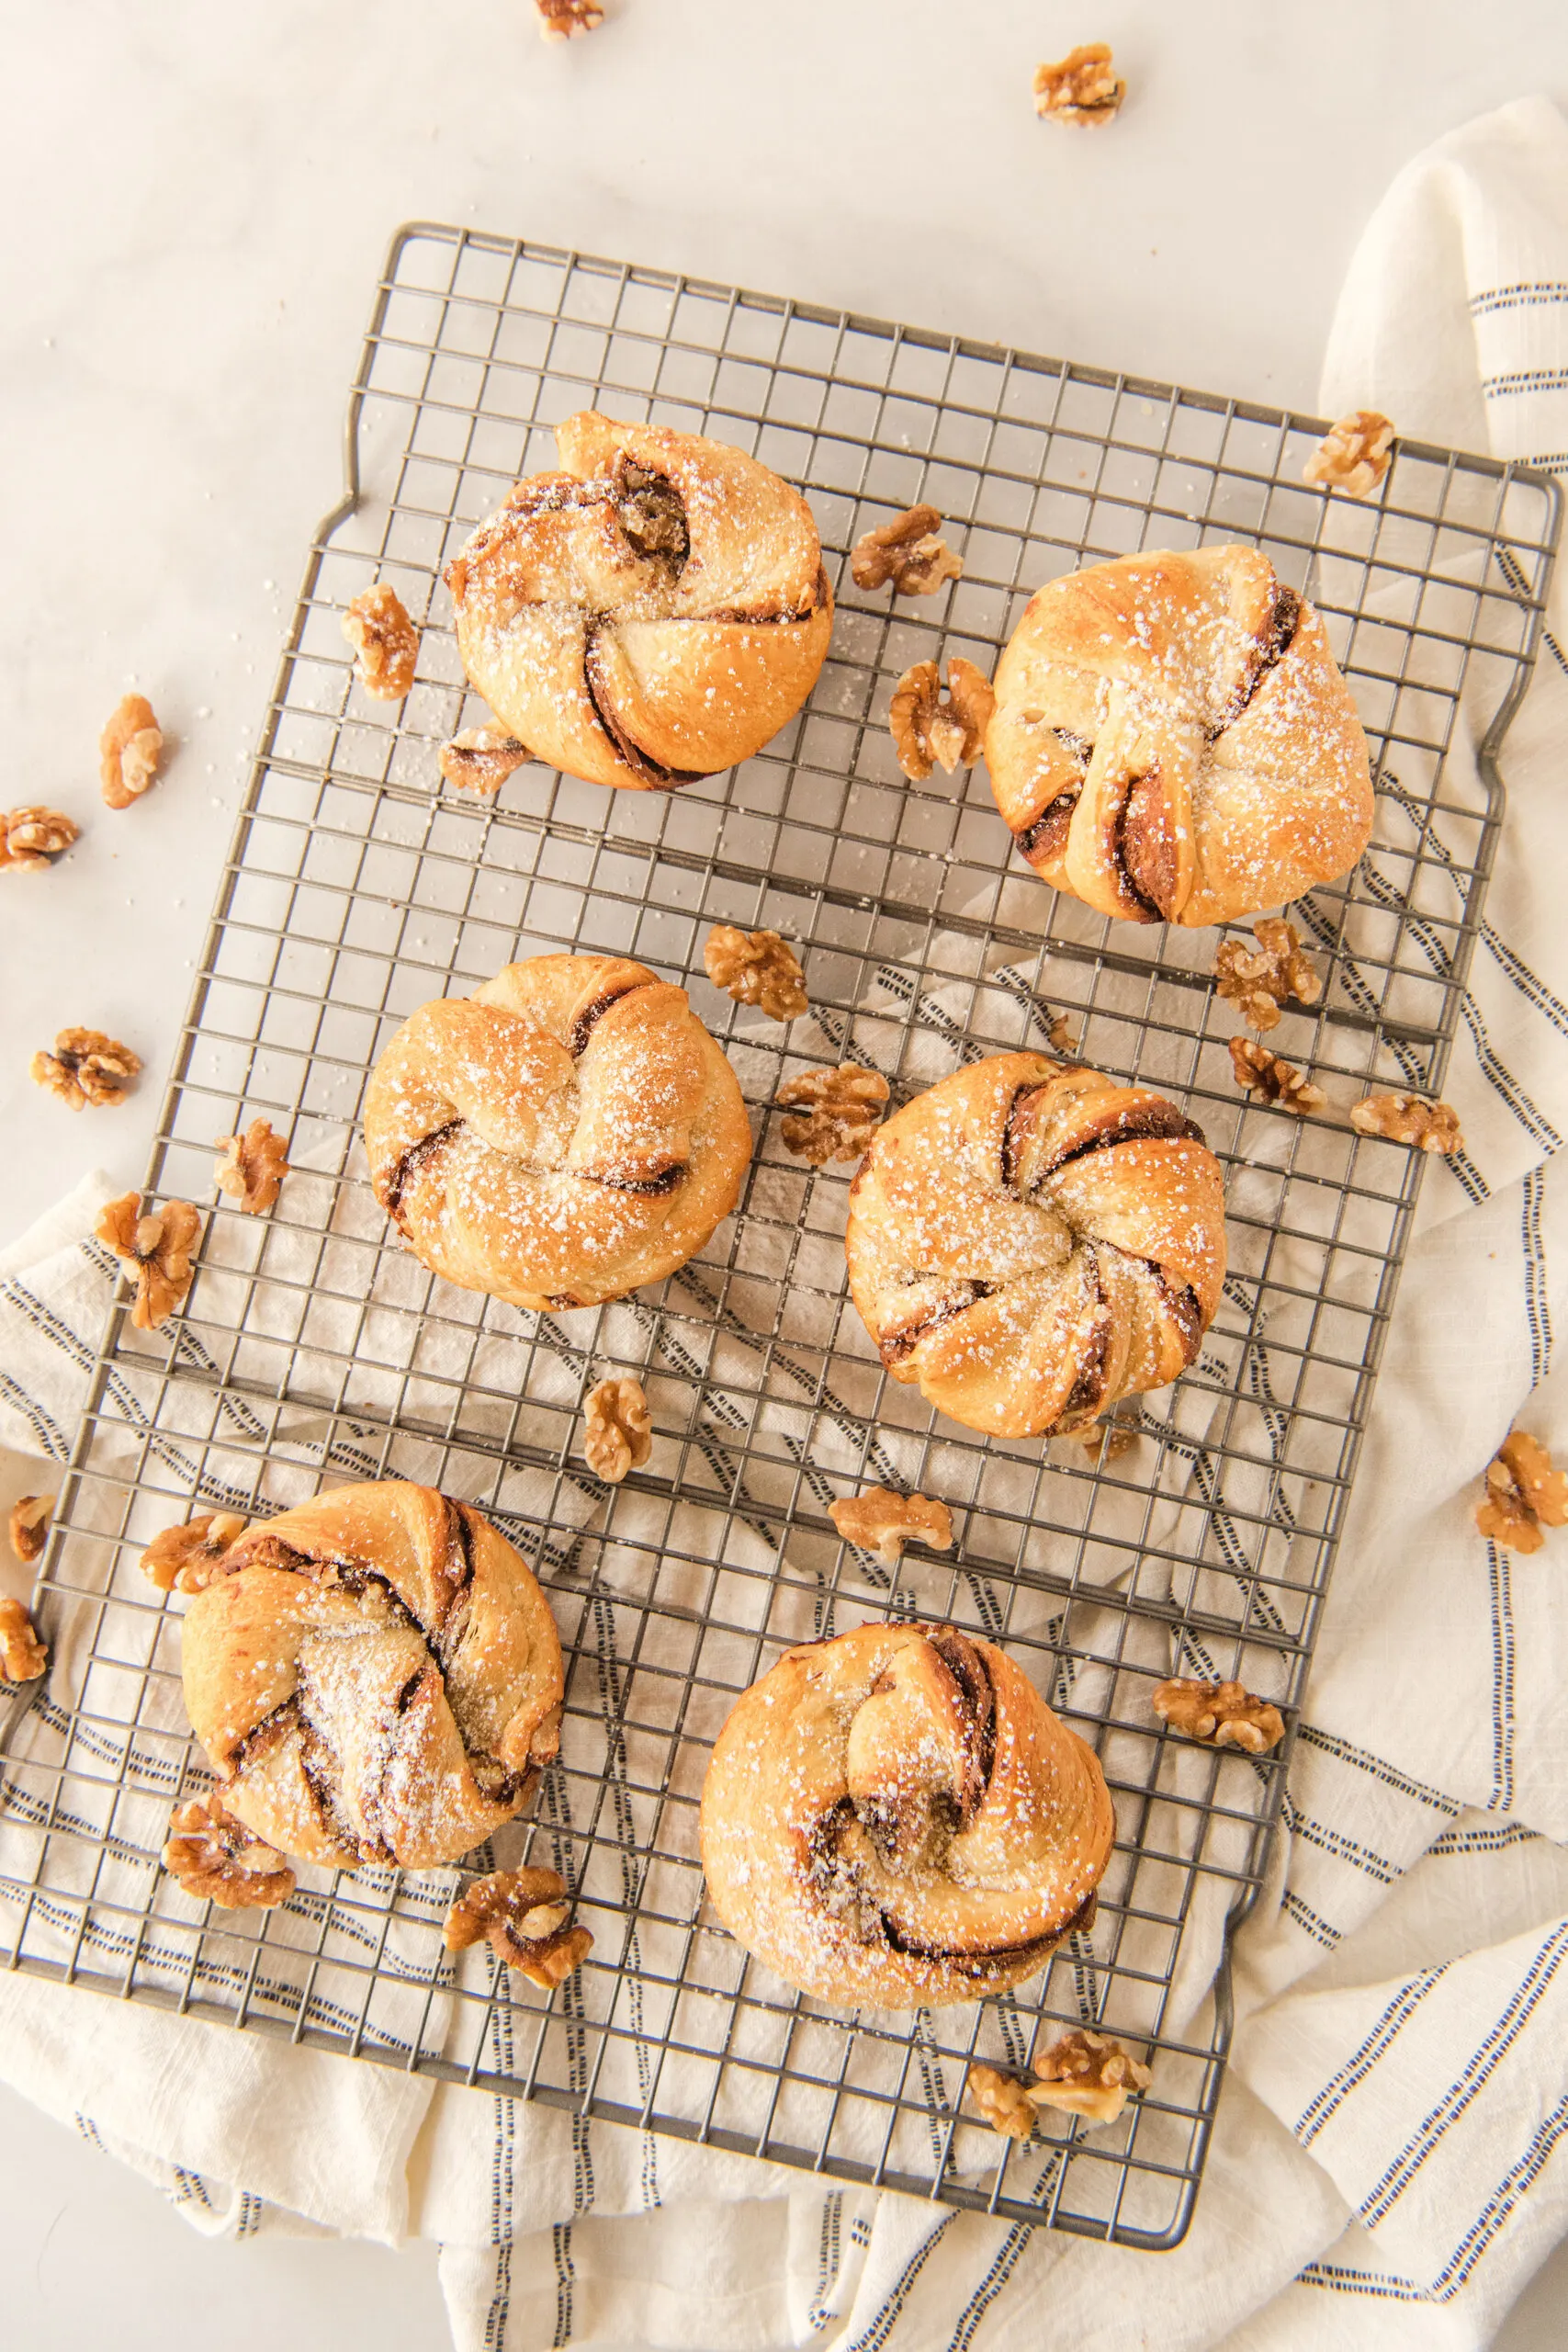 6 nutella muffins with confectioners' sugar on a wire rack with a cloth napkin